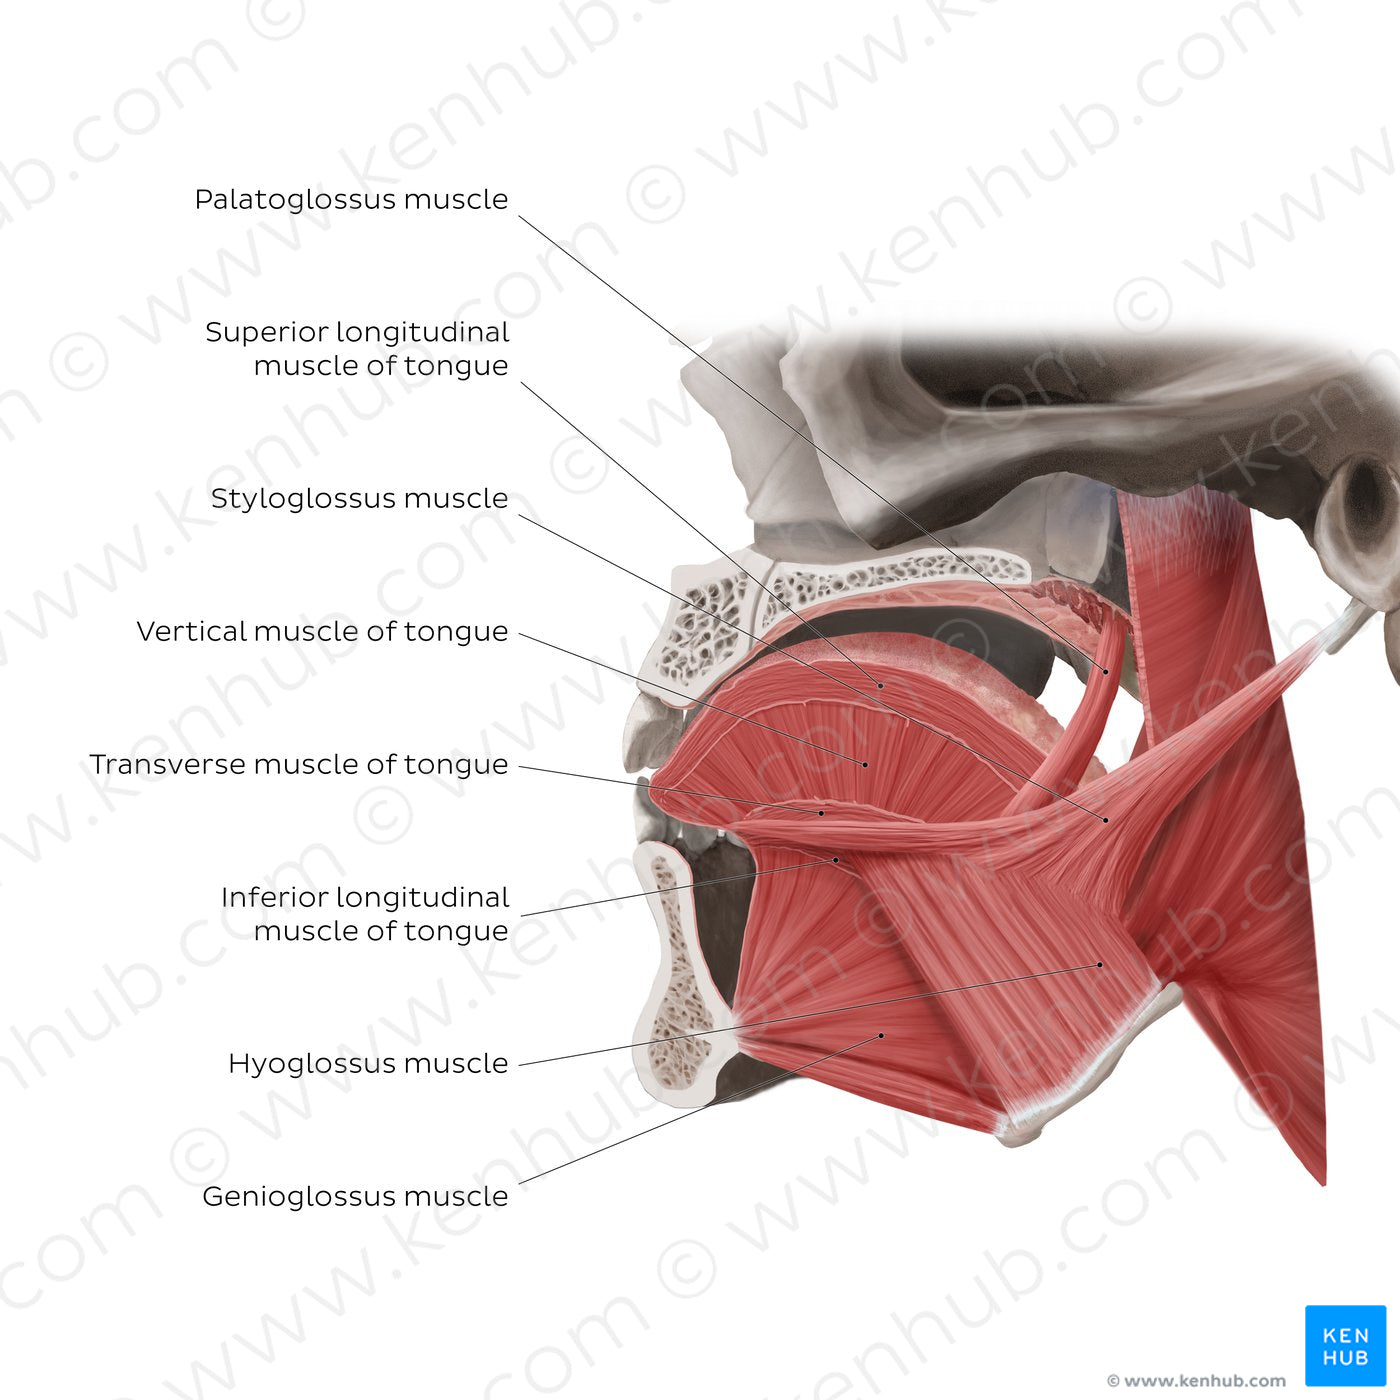 Muscles of the tongue: sagittal section (English)